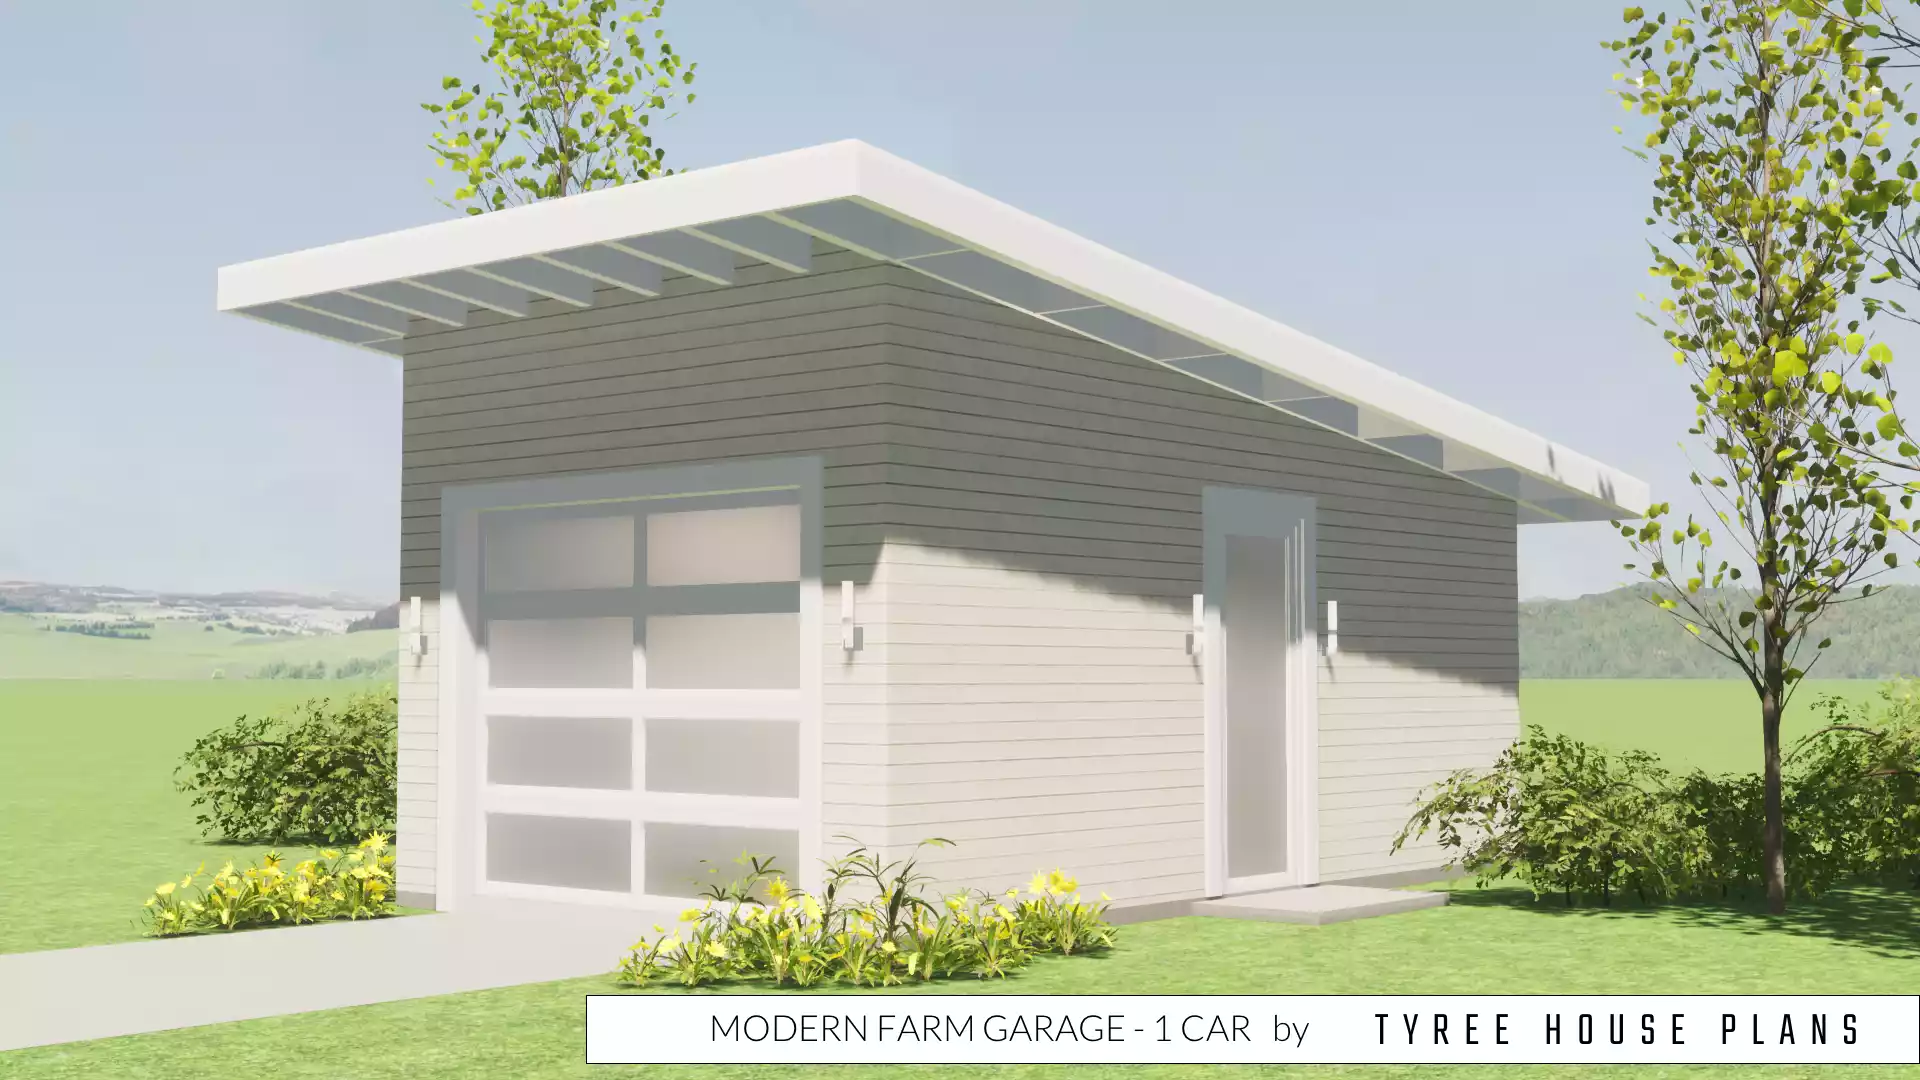 Modern Garage - 1 Car by Tyree House Plans